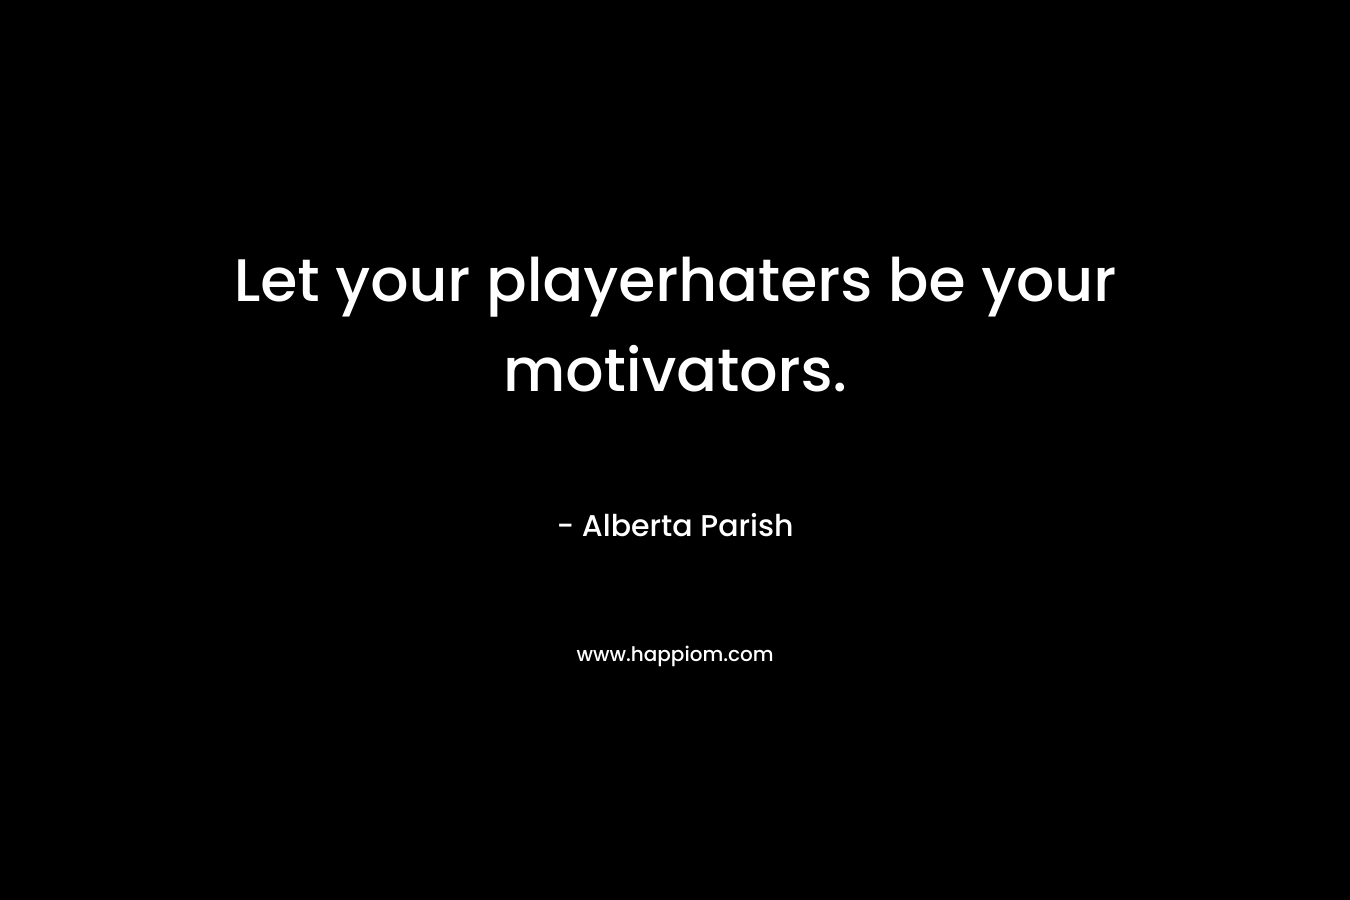 Let your playerhaters be your motivators.